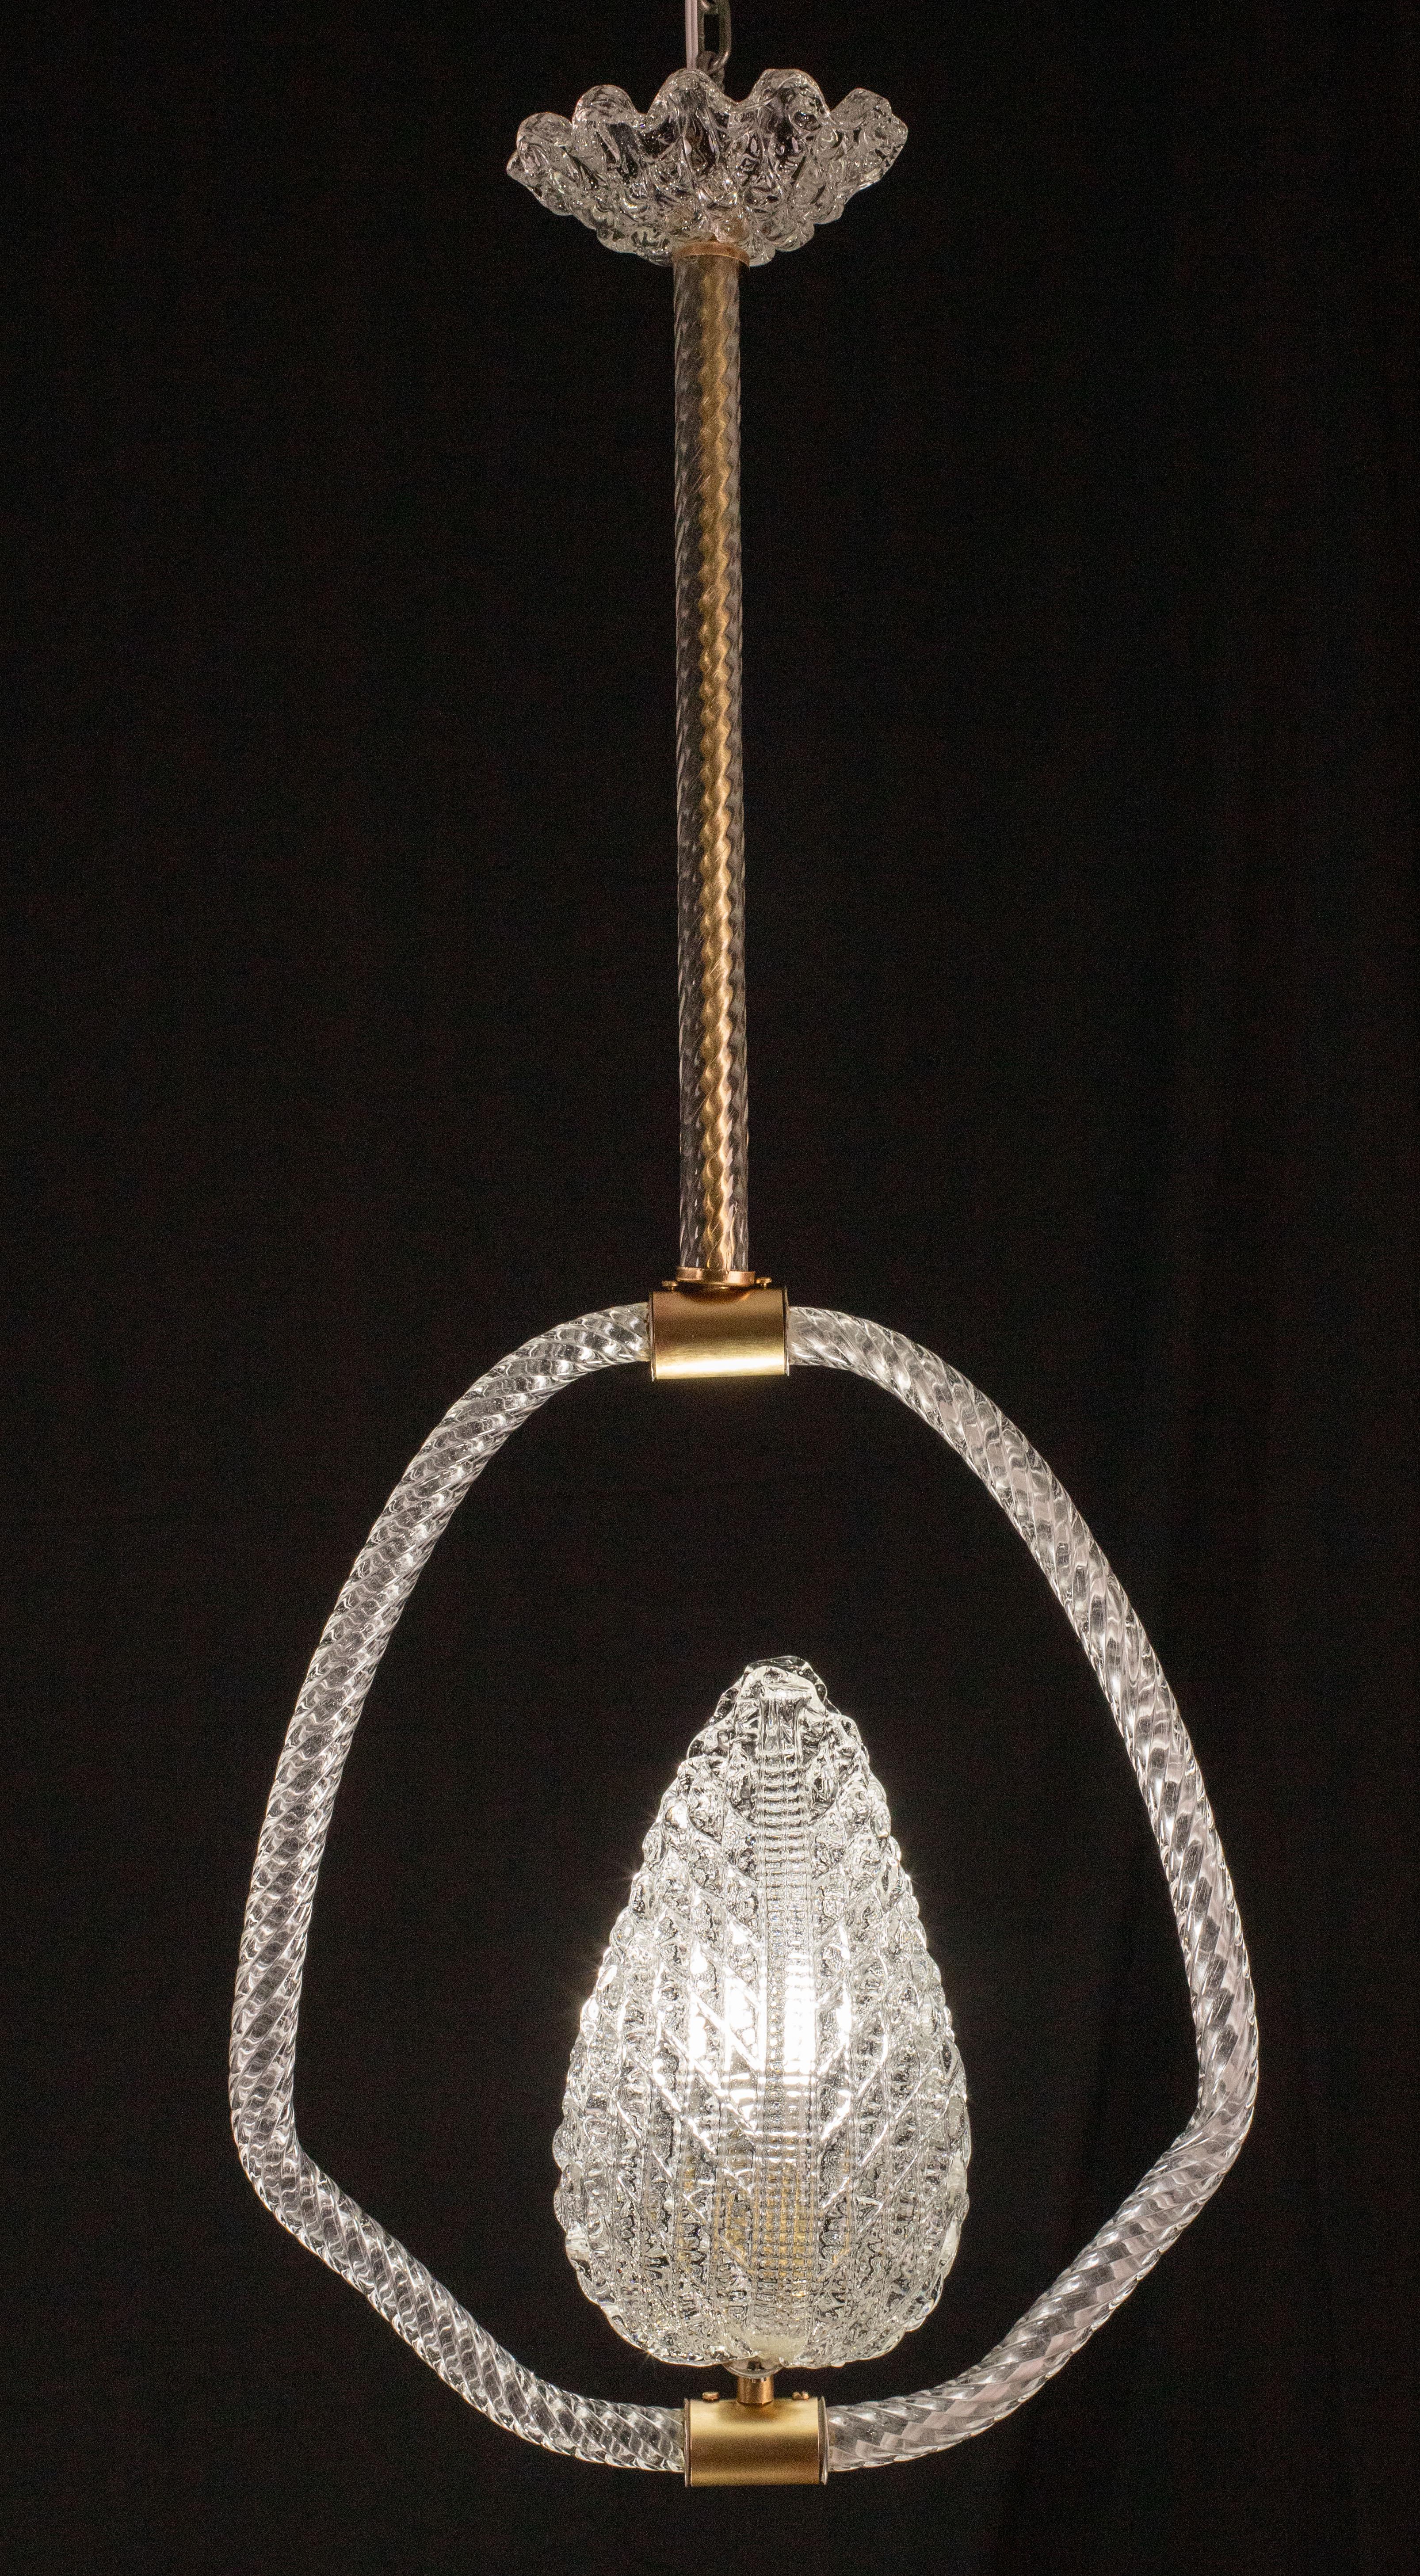 Trasparent Jewel Murano Glass Chandelier by Barovier e Toso, 1950s For Sale 5